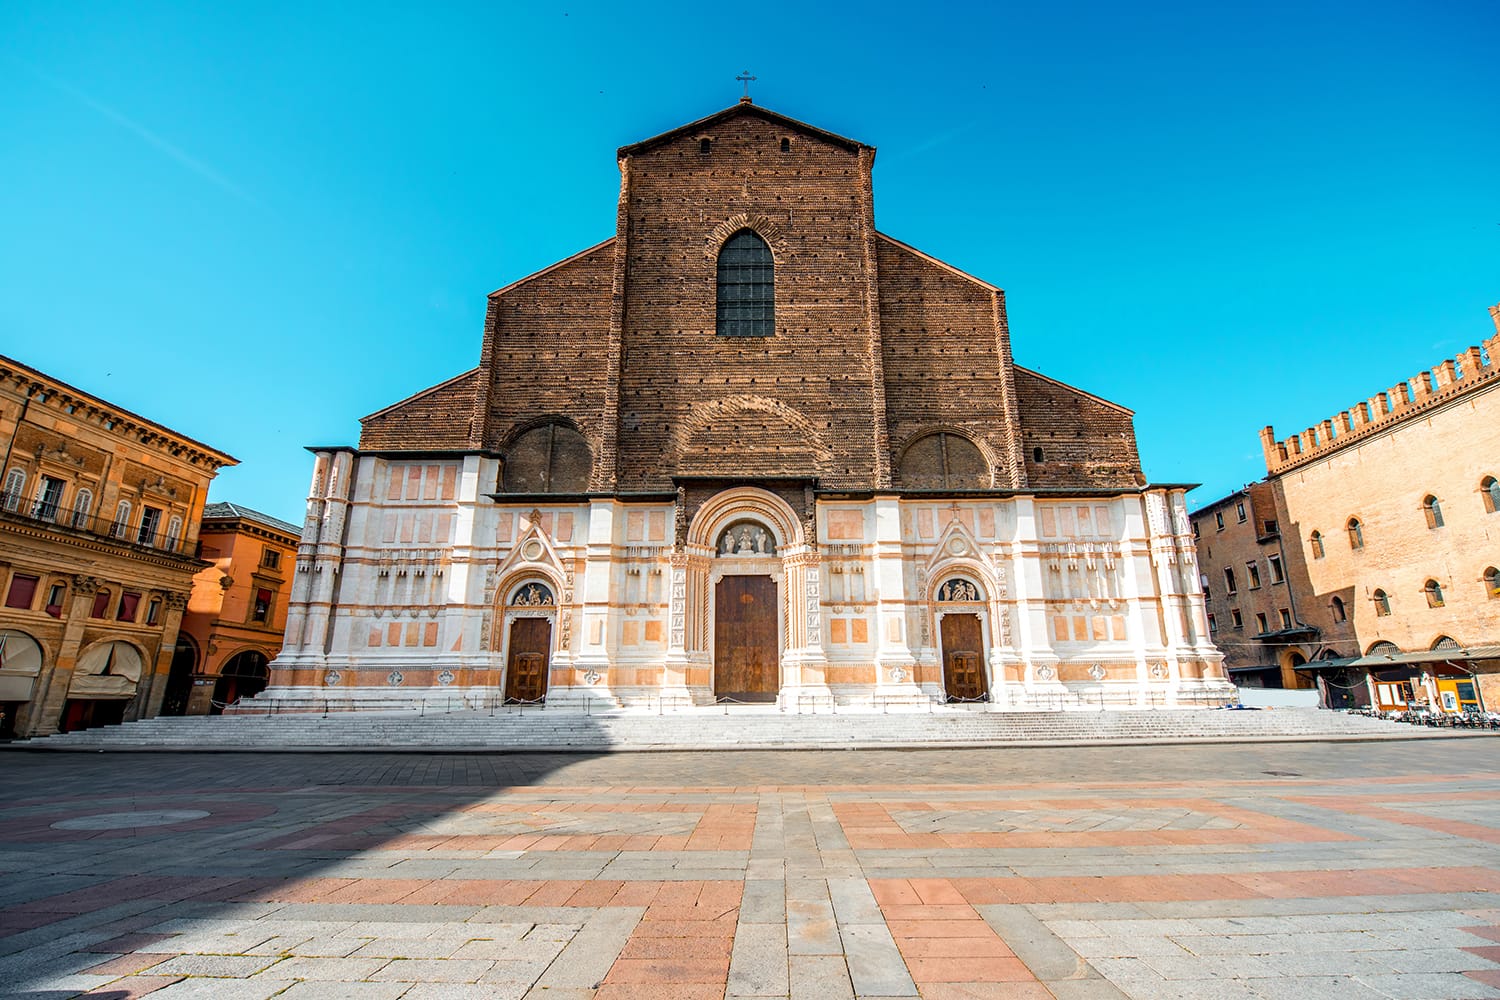 San Petronio church on the main square in Bologna city. It is the largest church built in bricks in the world.